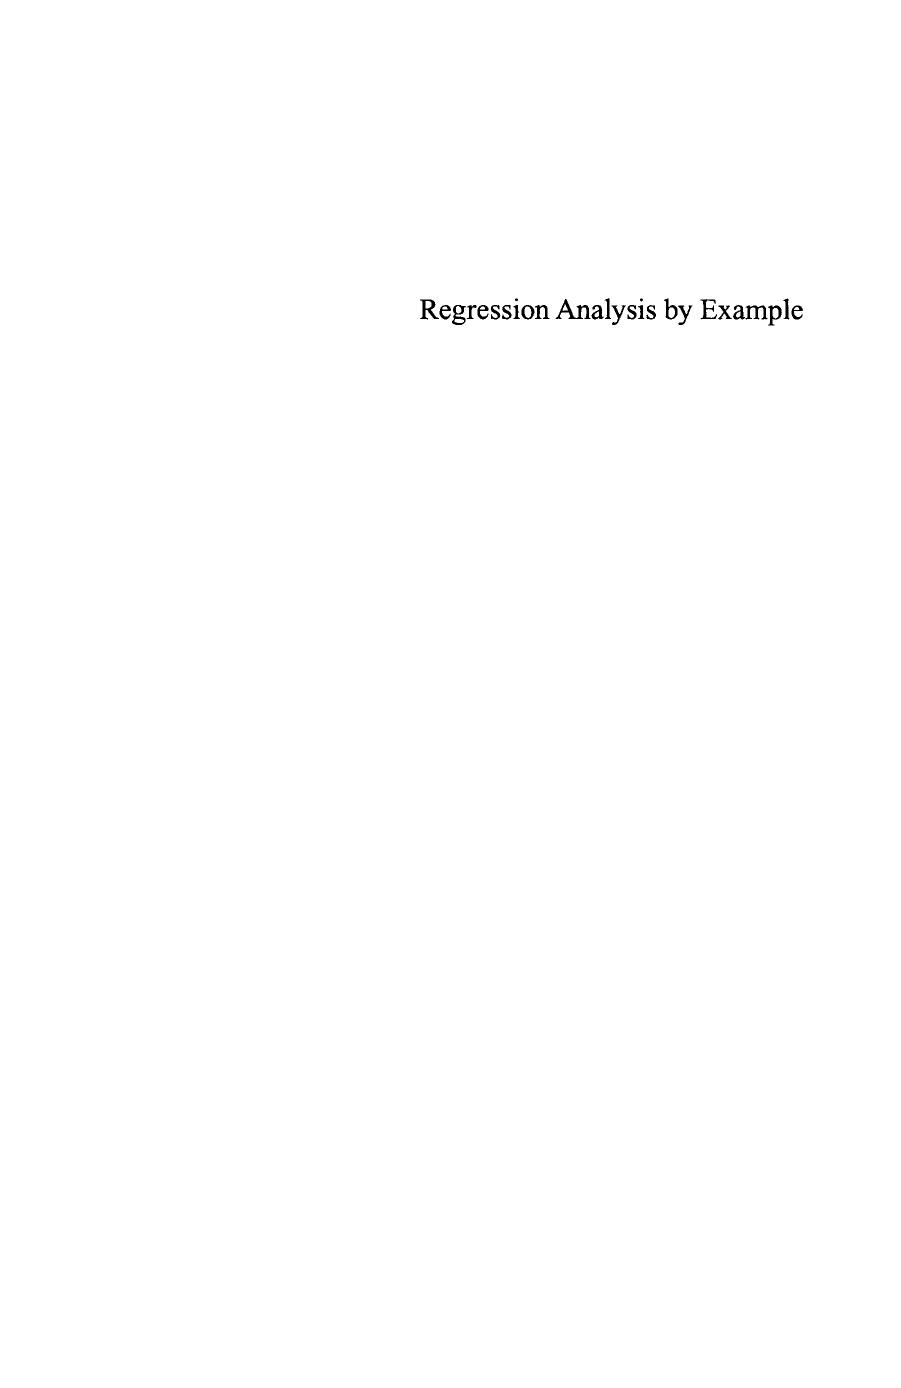 Regression Analysis by Example, 4th Ed (Wiley Series in Prob